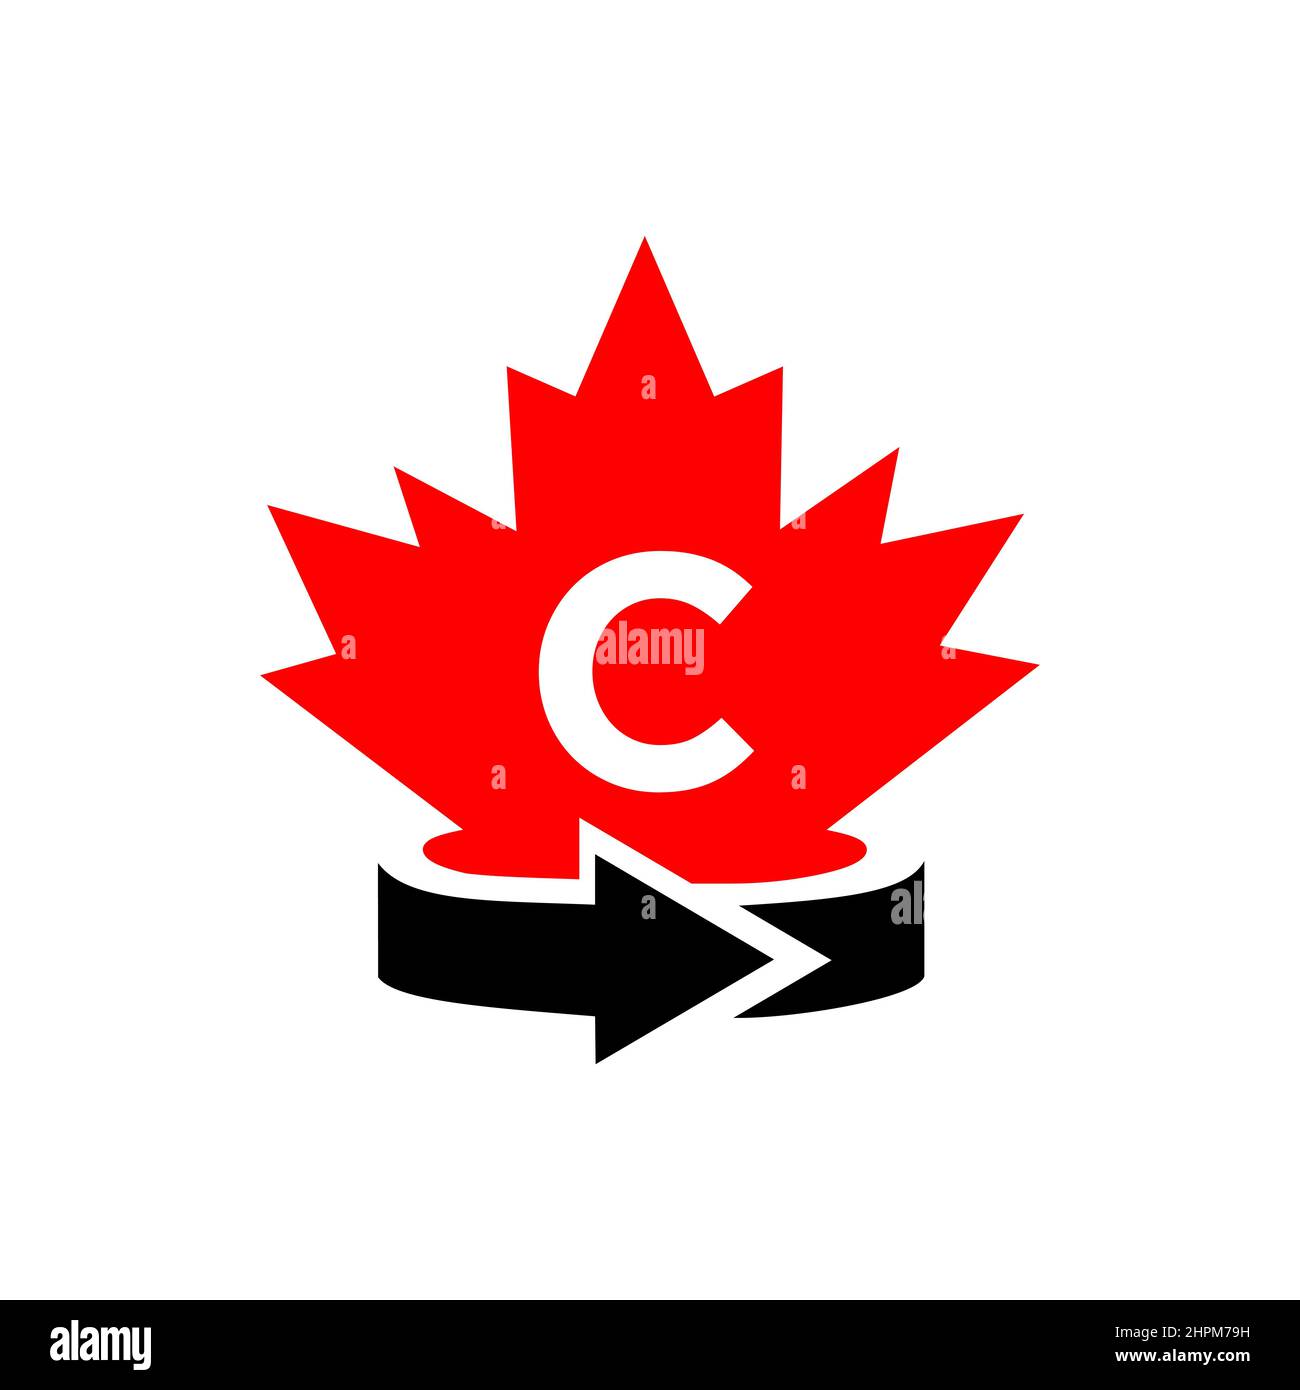 Canadian Maple Leaf Logo Design On Letter C Template. Red Maple Canadian Logotype With C Letter Vector Stock Vector